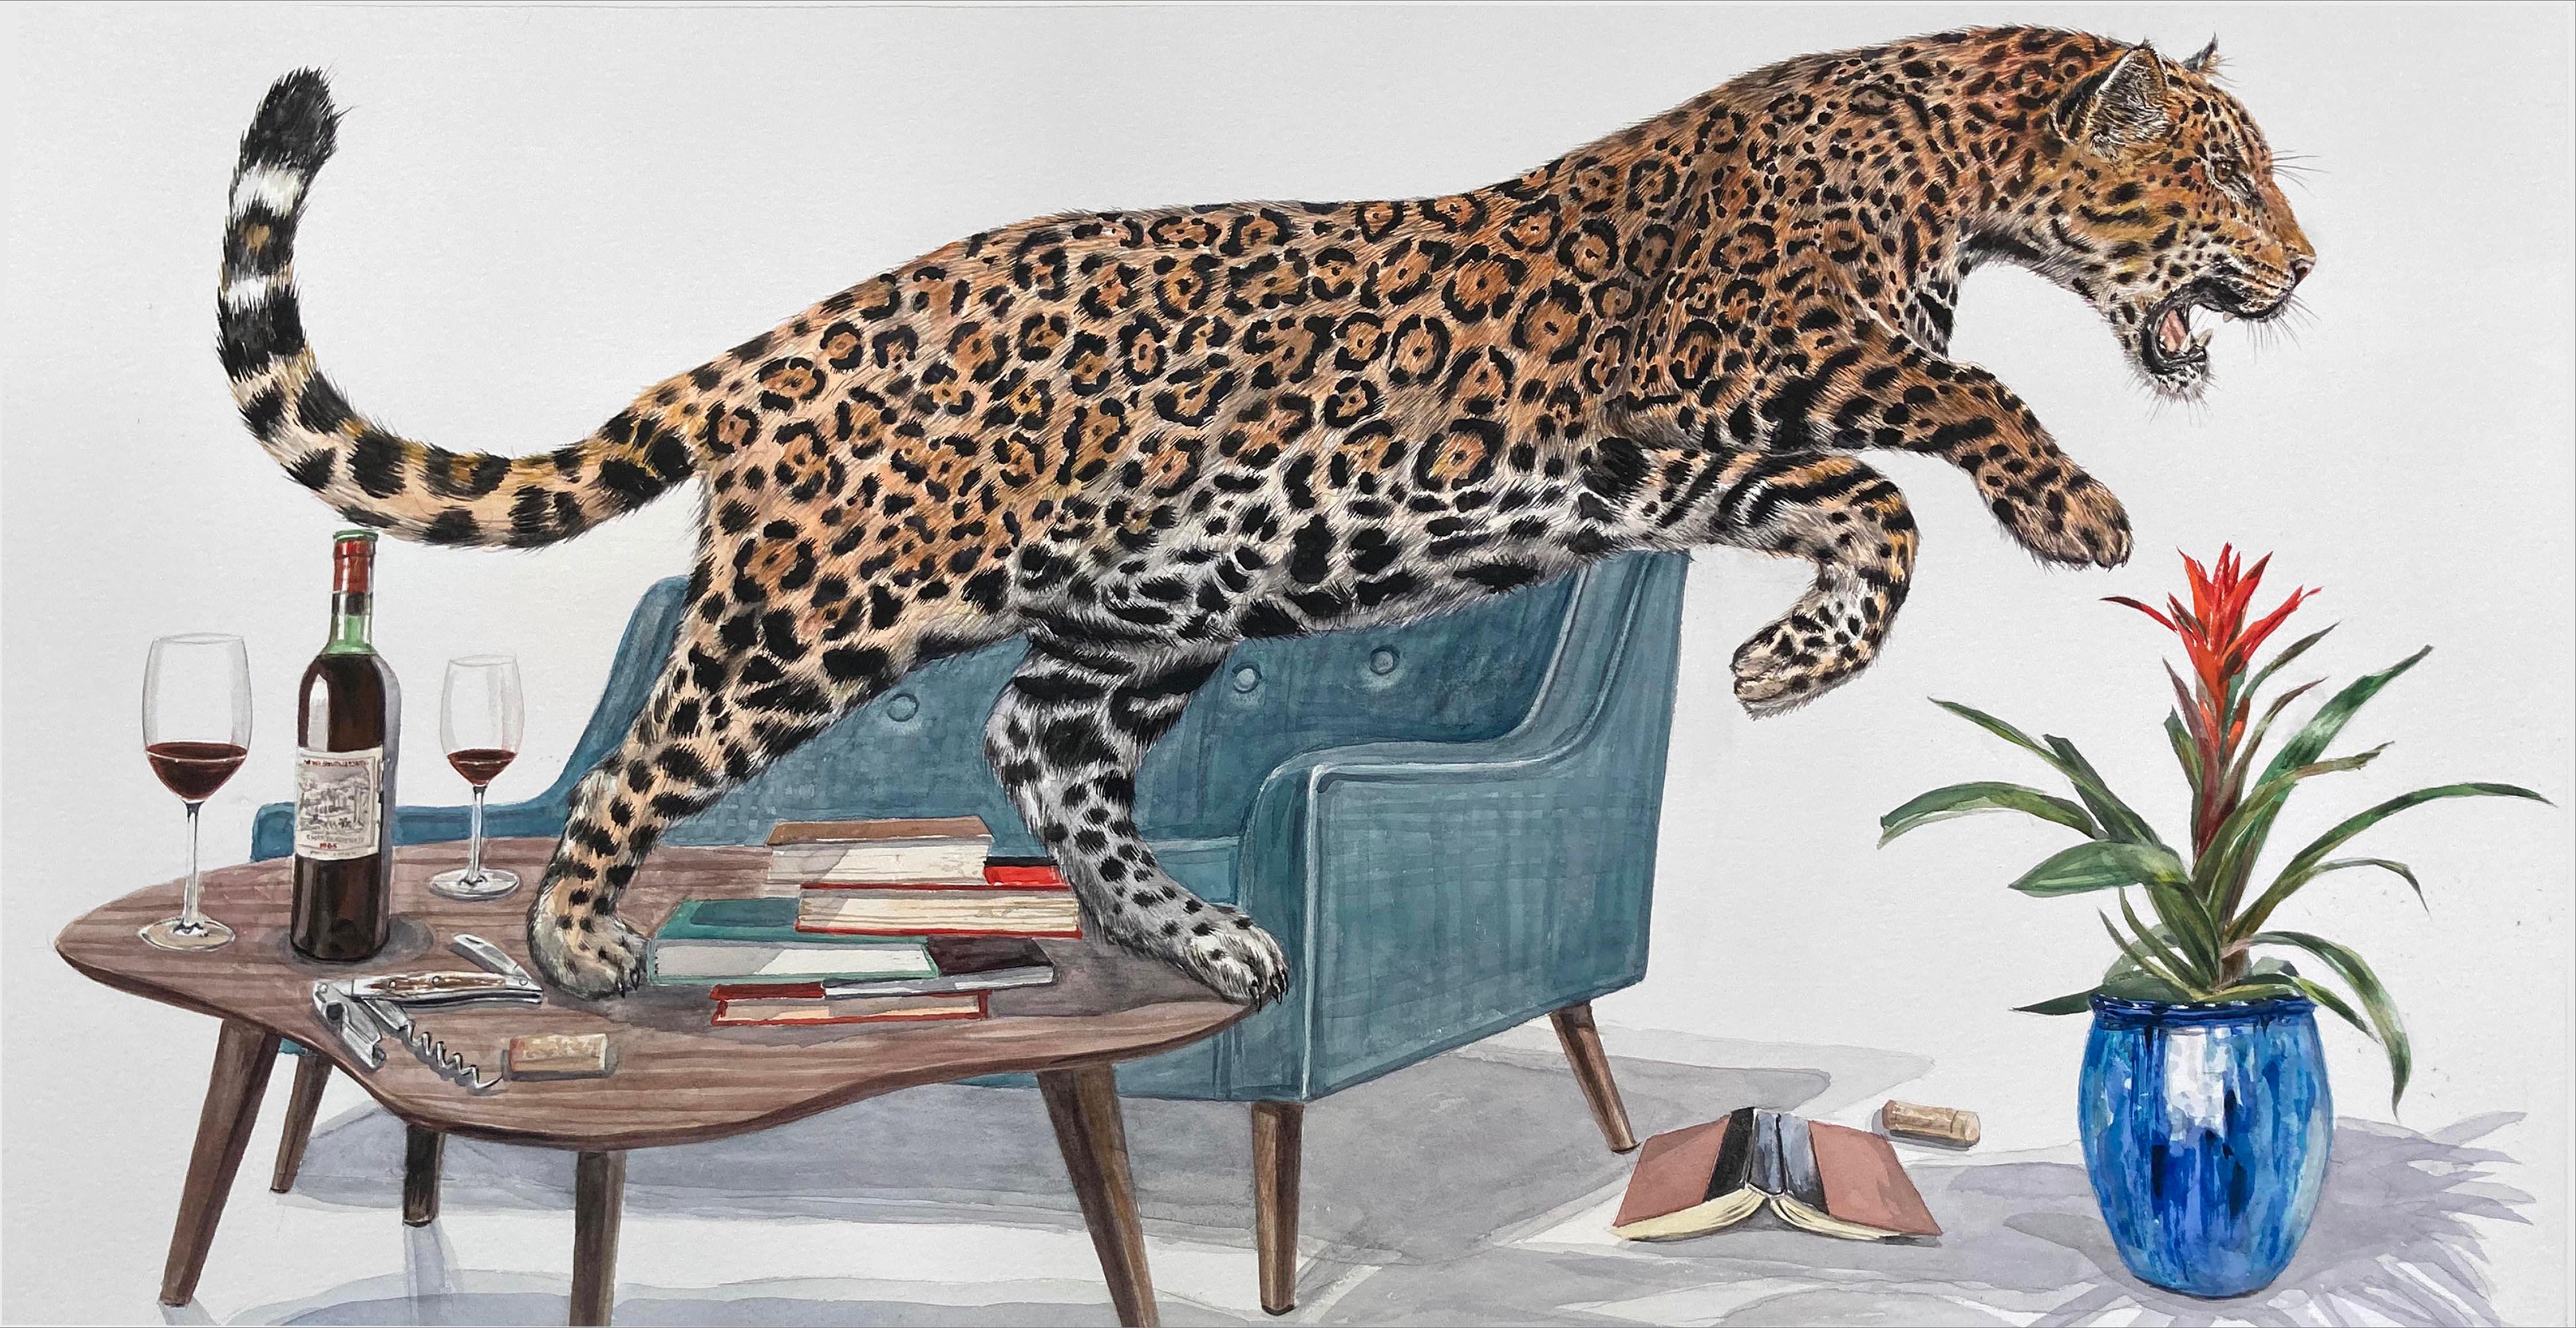 "The Toast" contemporary surrealist painting - jaguar leaps from modernist table